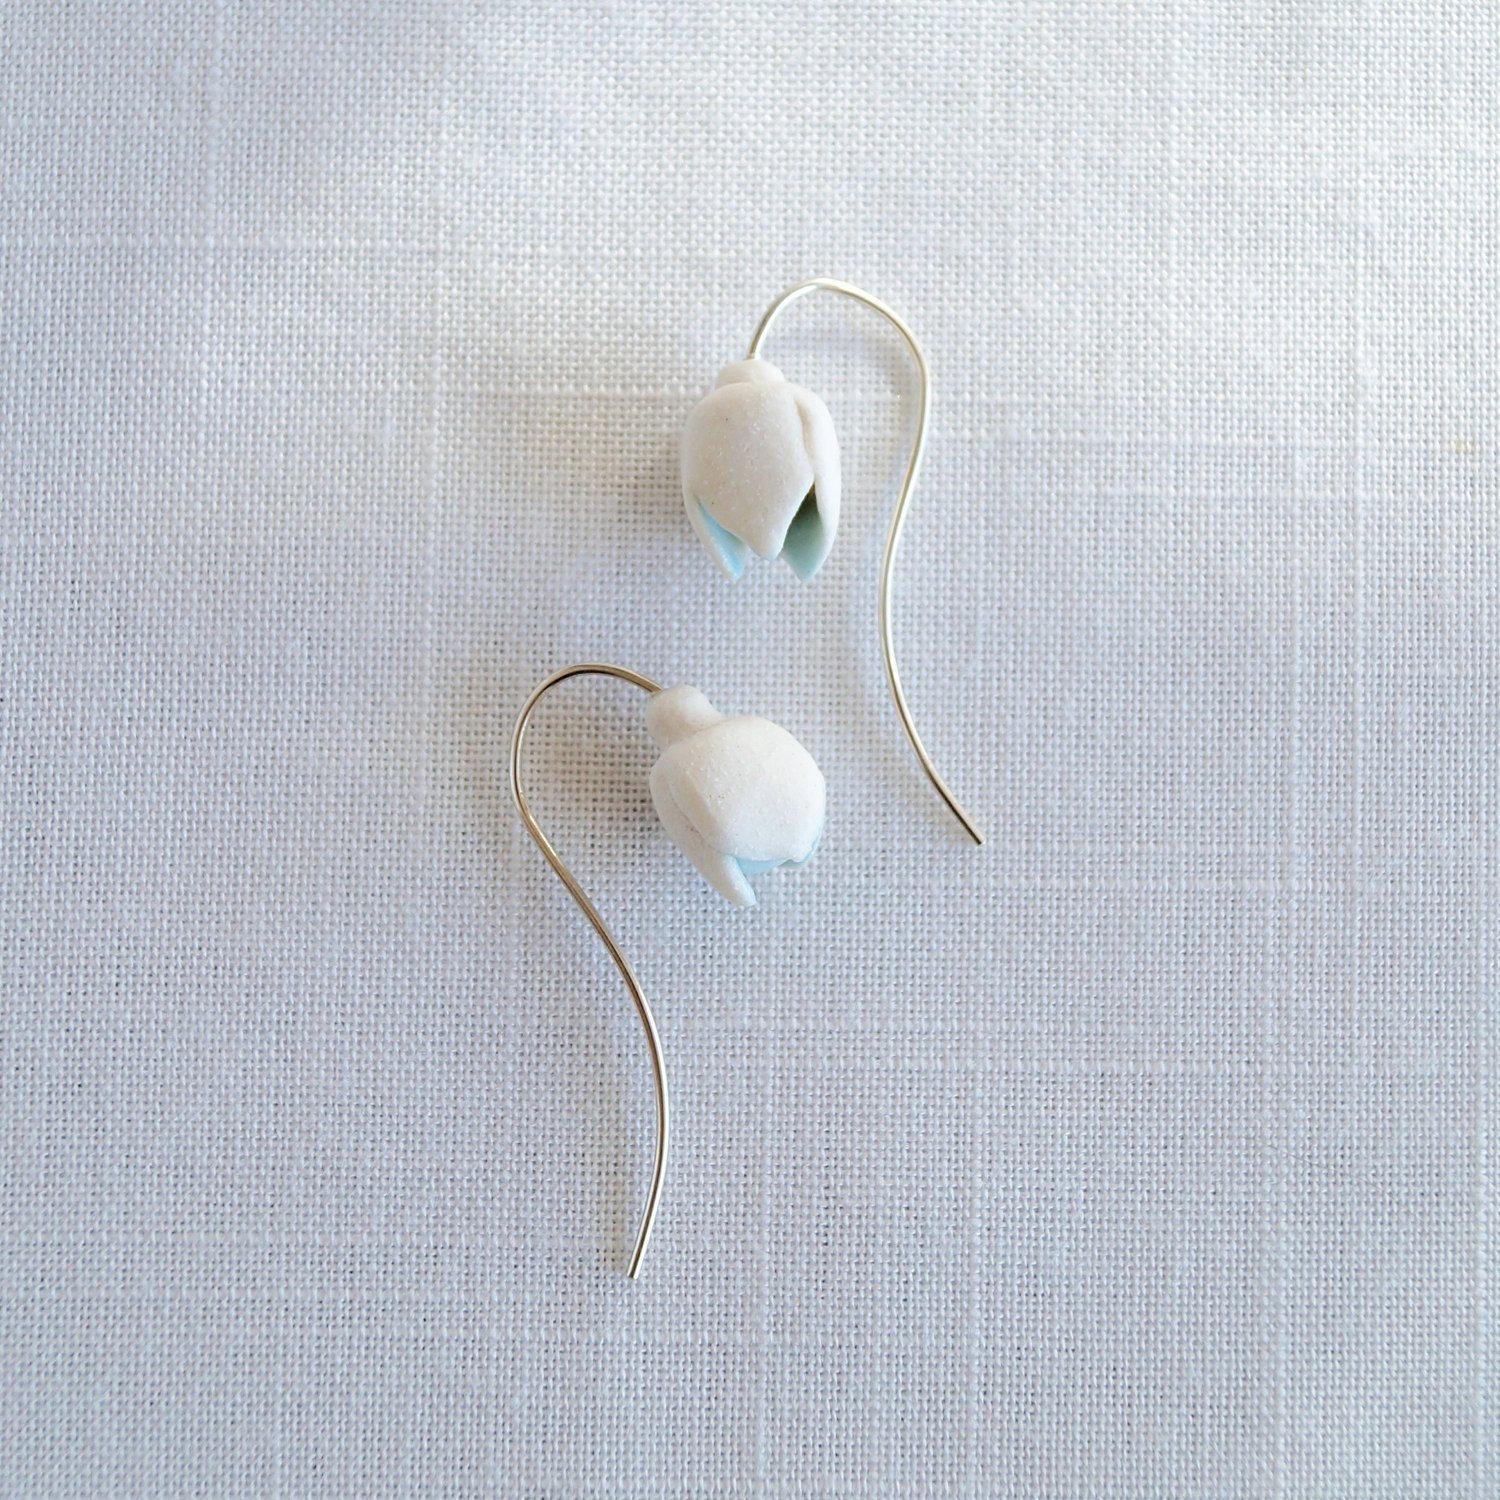 Porcelain snowdrops, snowdrop earrings, 925 sterling silver, hand crafted, ear wires, Vanillakiln, winter bride, winter birth